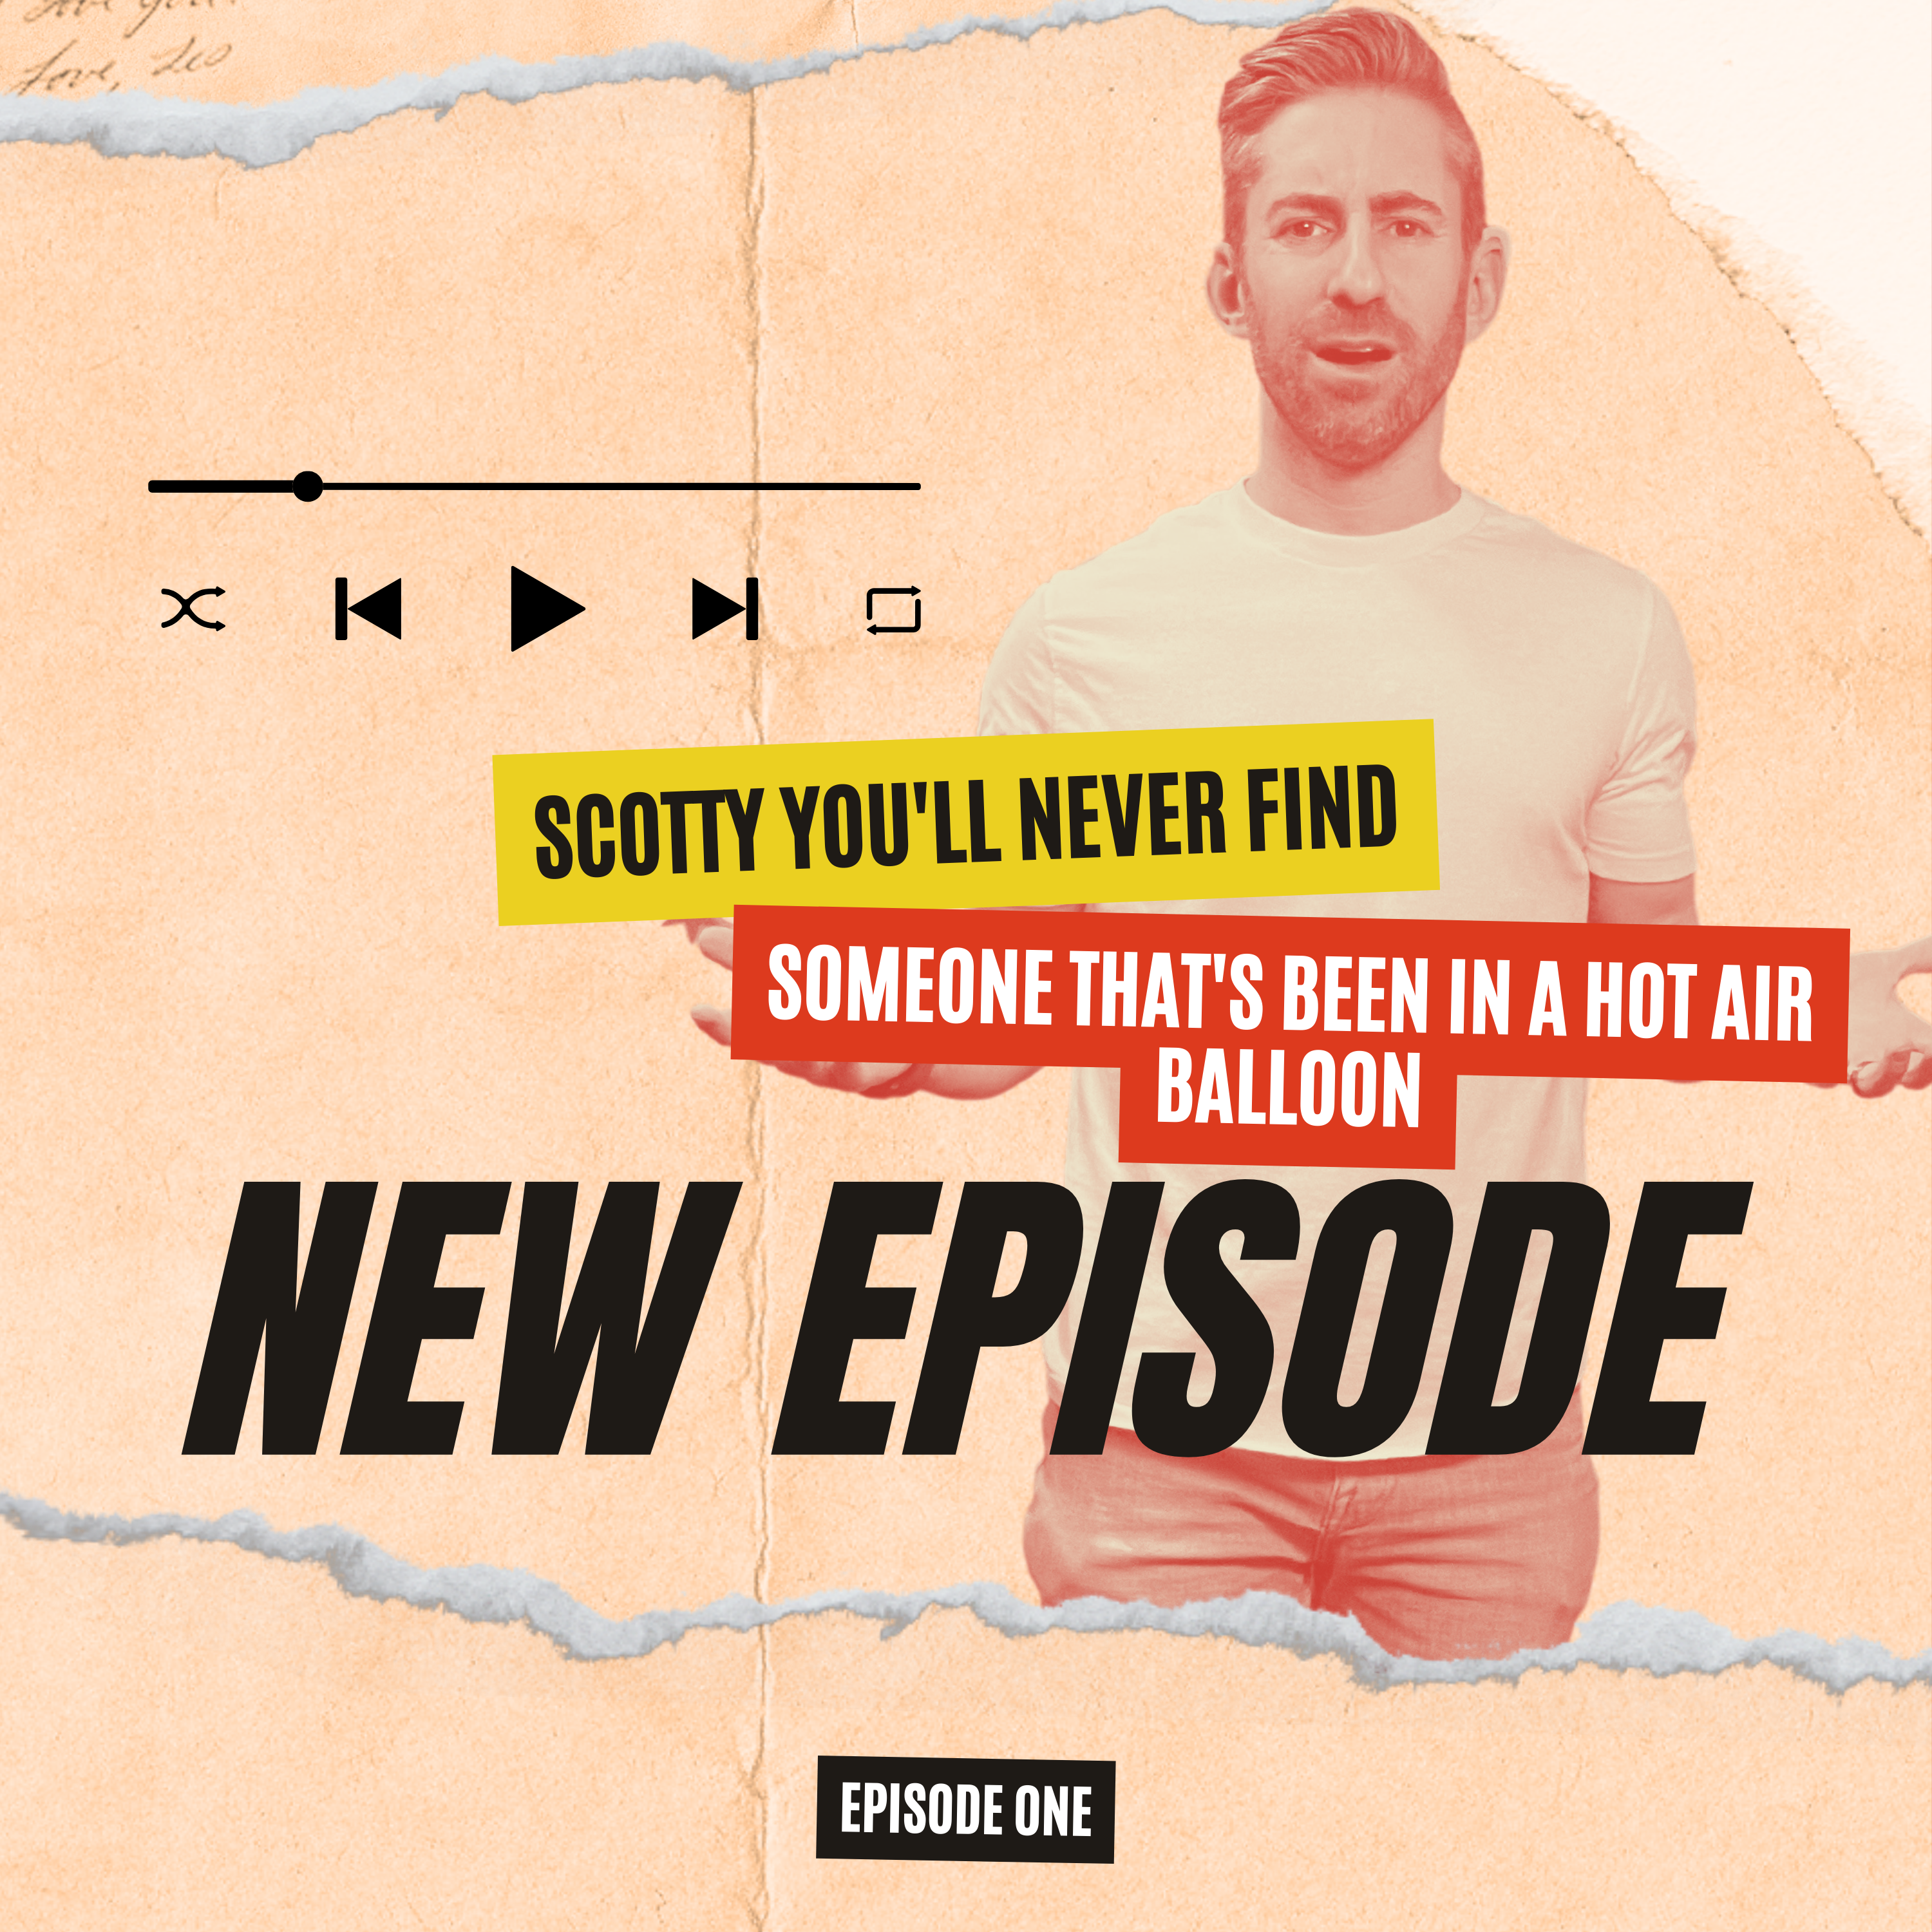 SCOTTY YOU'LL NEVER FIND - SOMEONE THAT'S BEEN IN A HOT AIR BALLOON